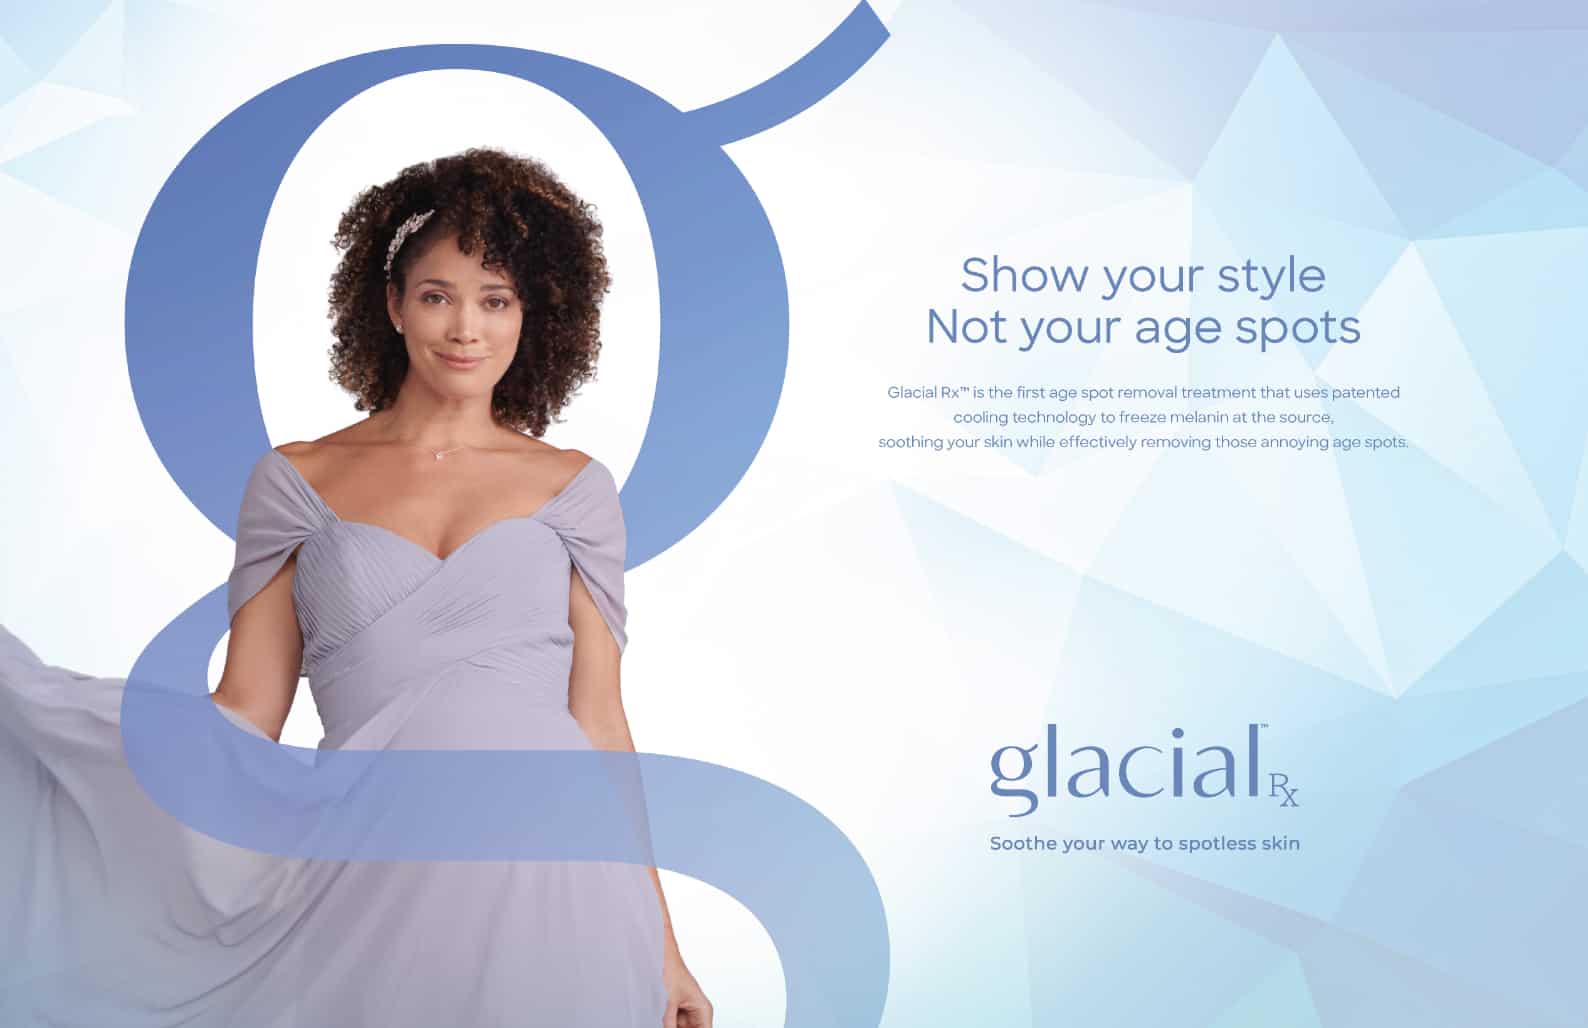 Glacial Rx advertisement with dark haired woman